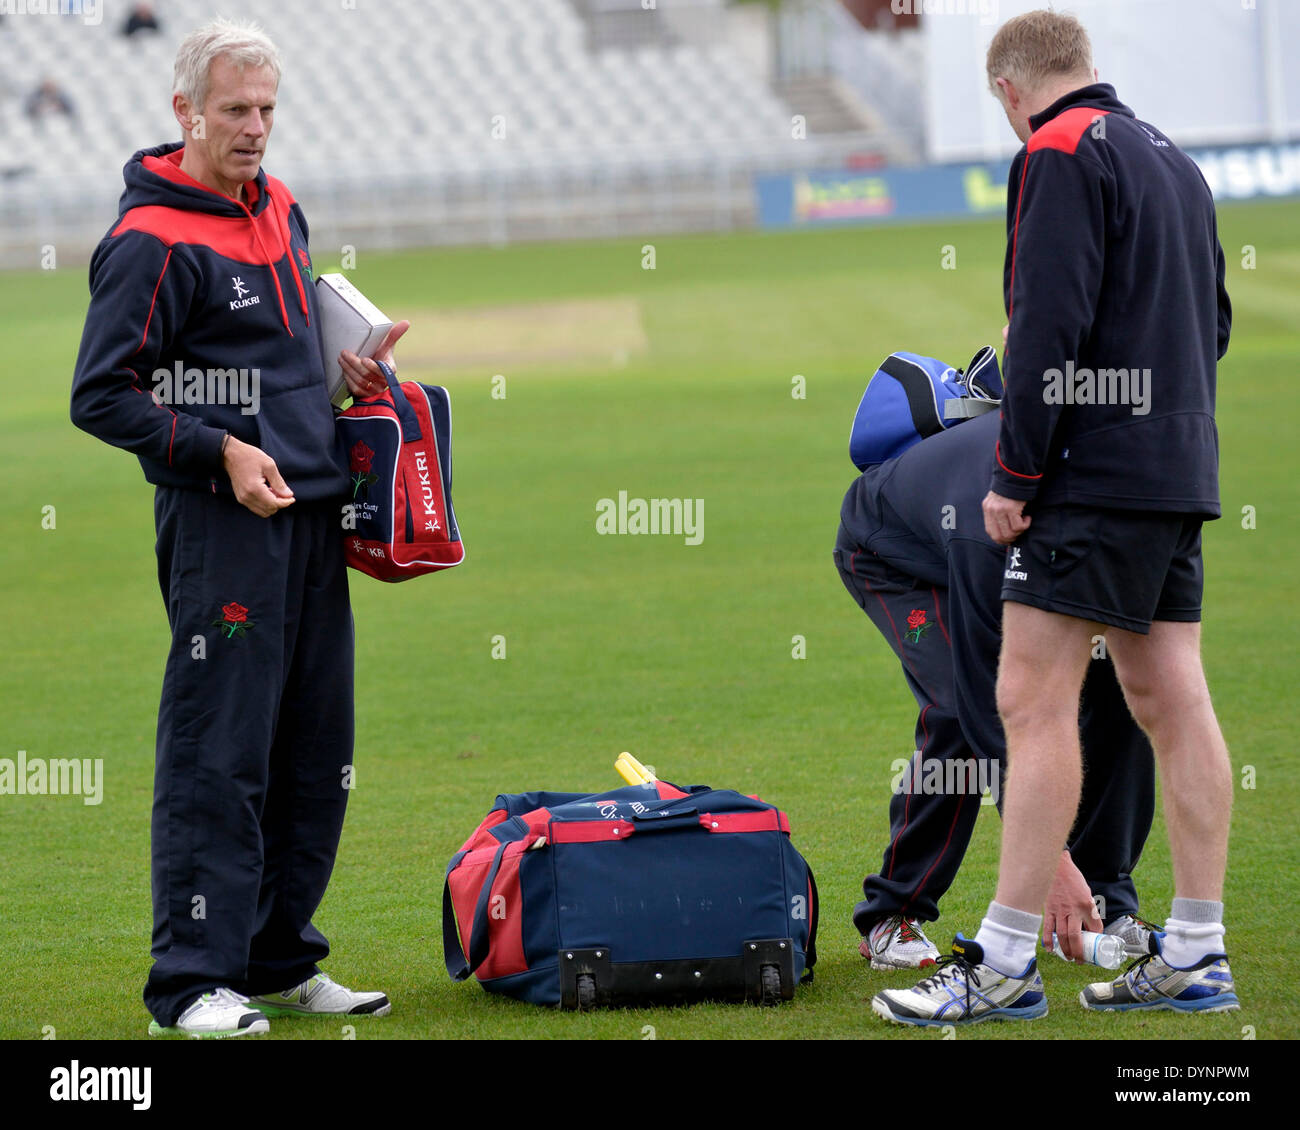 Manchester, UK. 23rd Apr, 2014. Peter Moores, the head coach at Lancashire County Cricket Club at the end of the warm-up session on the morning of the final day of the match against Warwickshire before taking up his new post as manager of the England Cricket Team. Peter Moores Last Match As Lancashire Coach Manchester, UK 23rd April 2014 Credit:  John Fryer/Alamy Live News Stock Photo